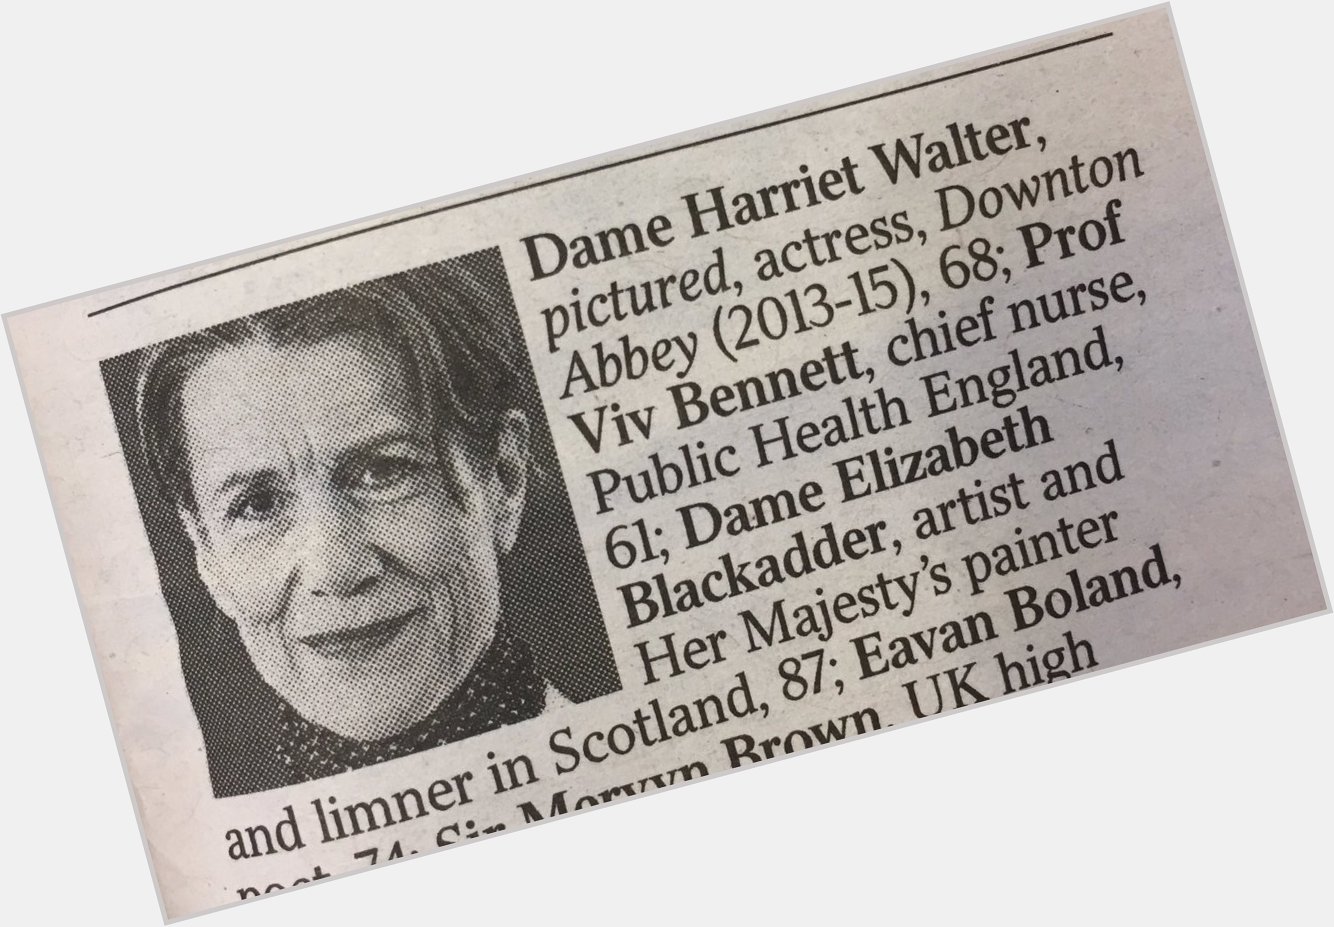 Happy birthday to Dame Harriet Walter, actress best known for her 5min turn in Downton Abbey   